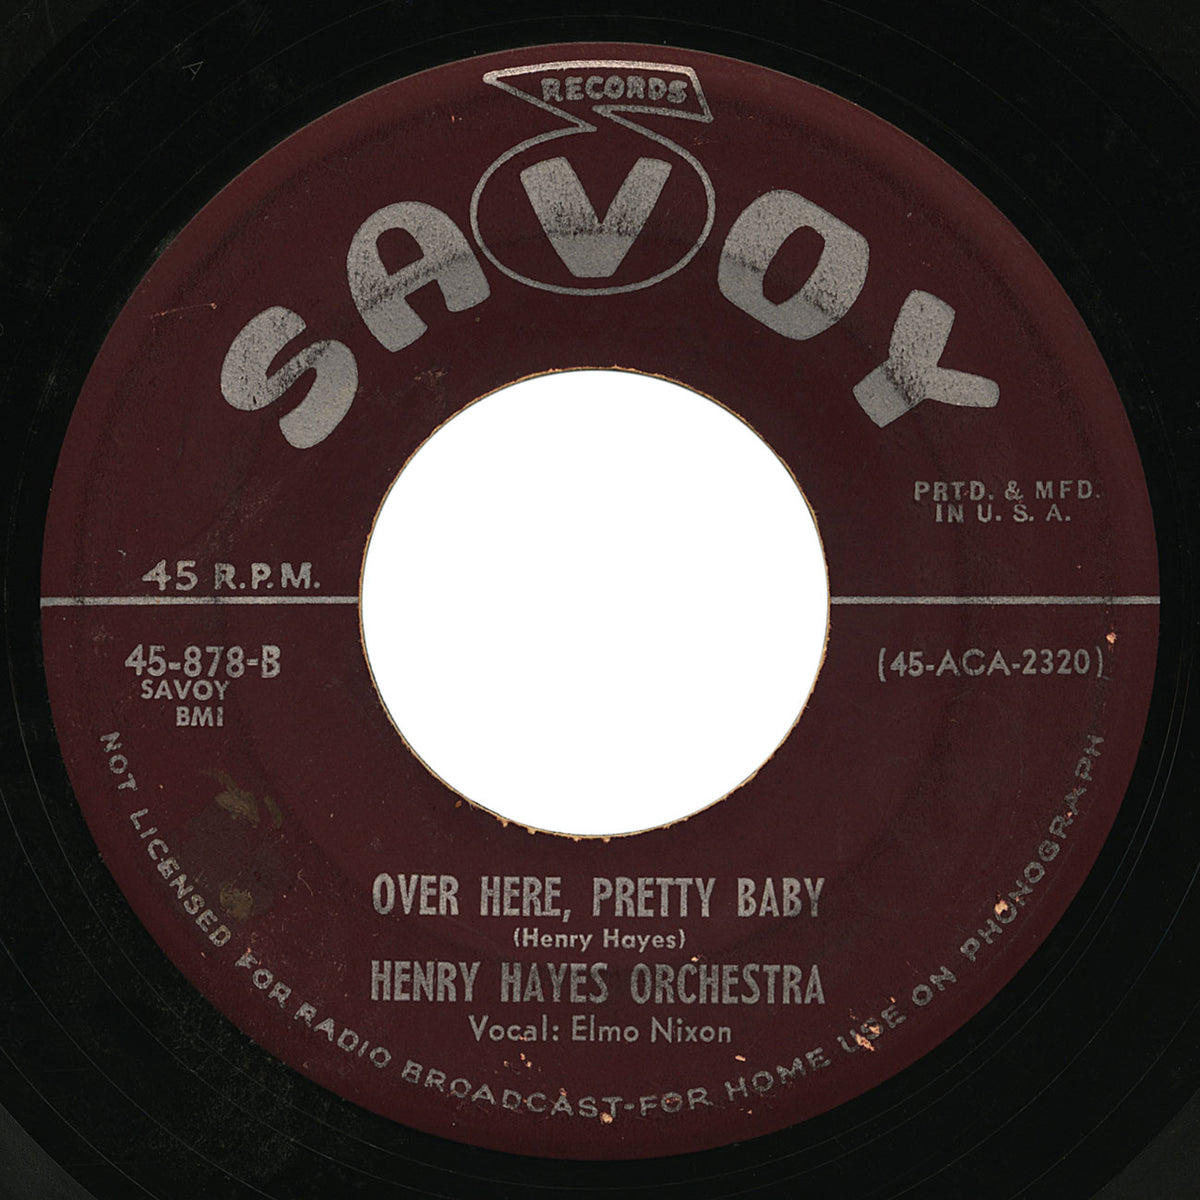 Henry Hayes Orchestra – Over Here, Pretty Baby – Savoy